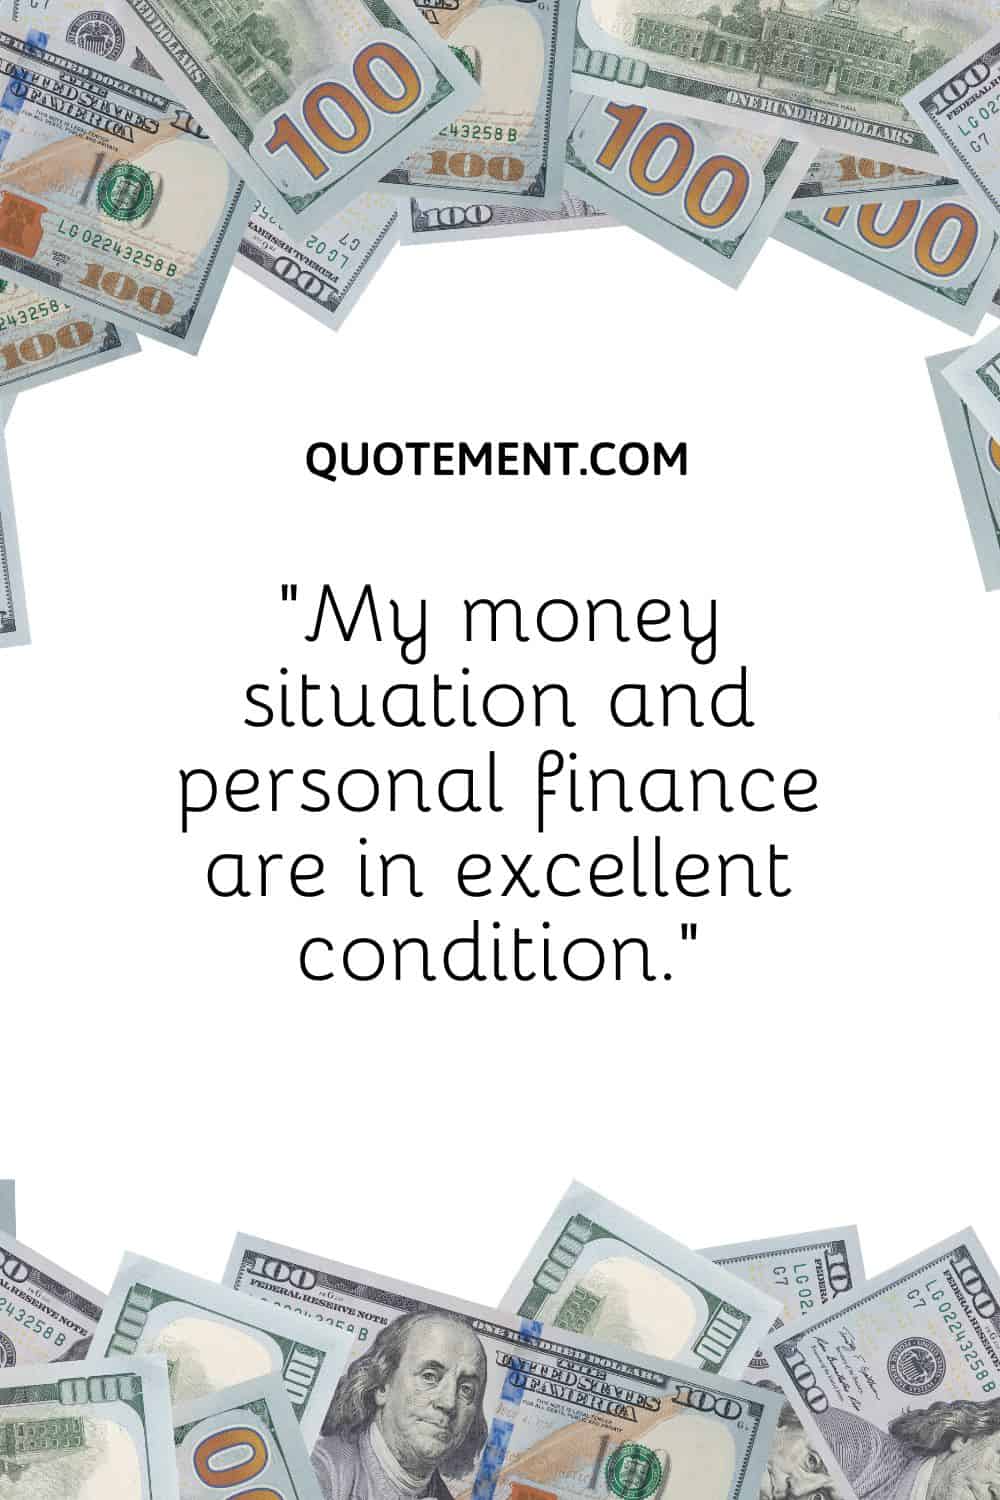 “My money situation and personal finance are in excellent condition.”